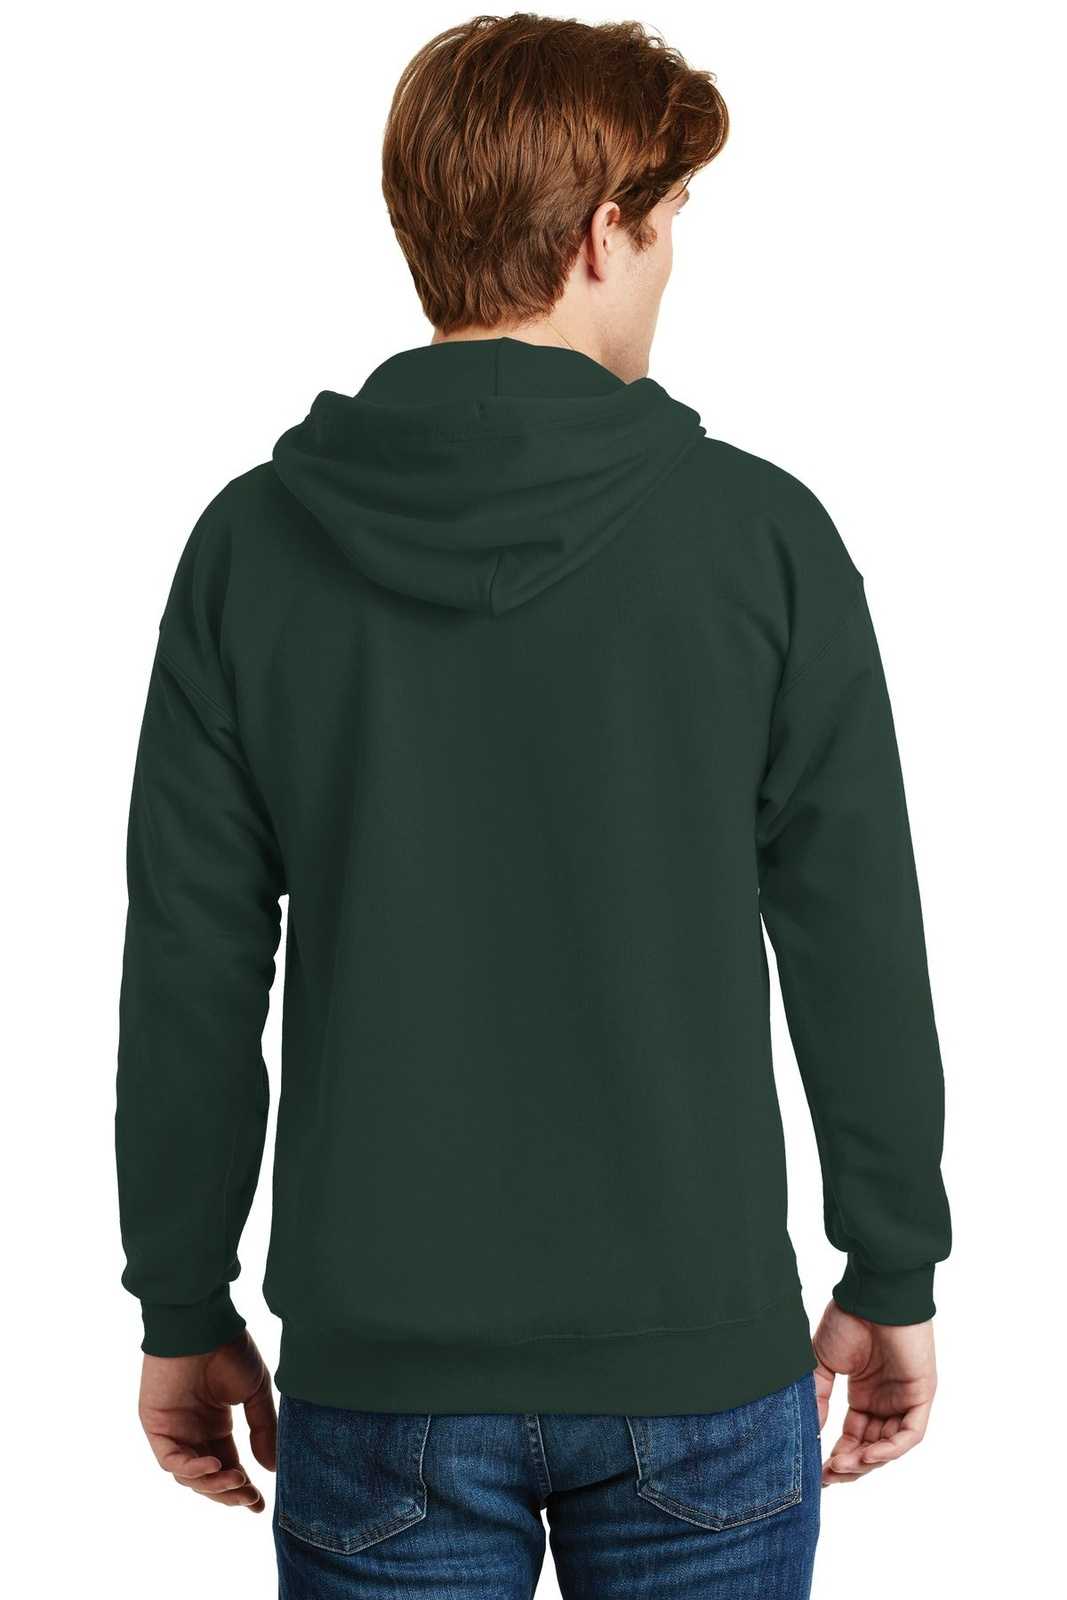 Hanes F283 Ultimate Cotton Full-Zip Hooded Sweatshirt - Deep Forest - HIT a Double